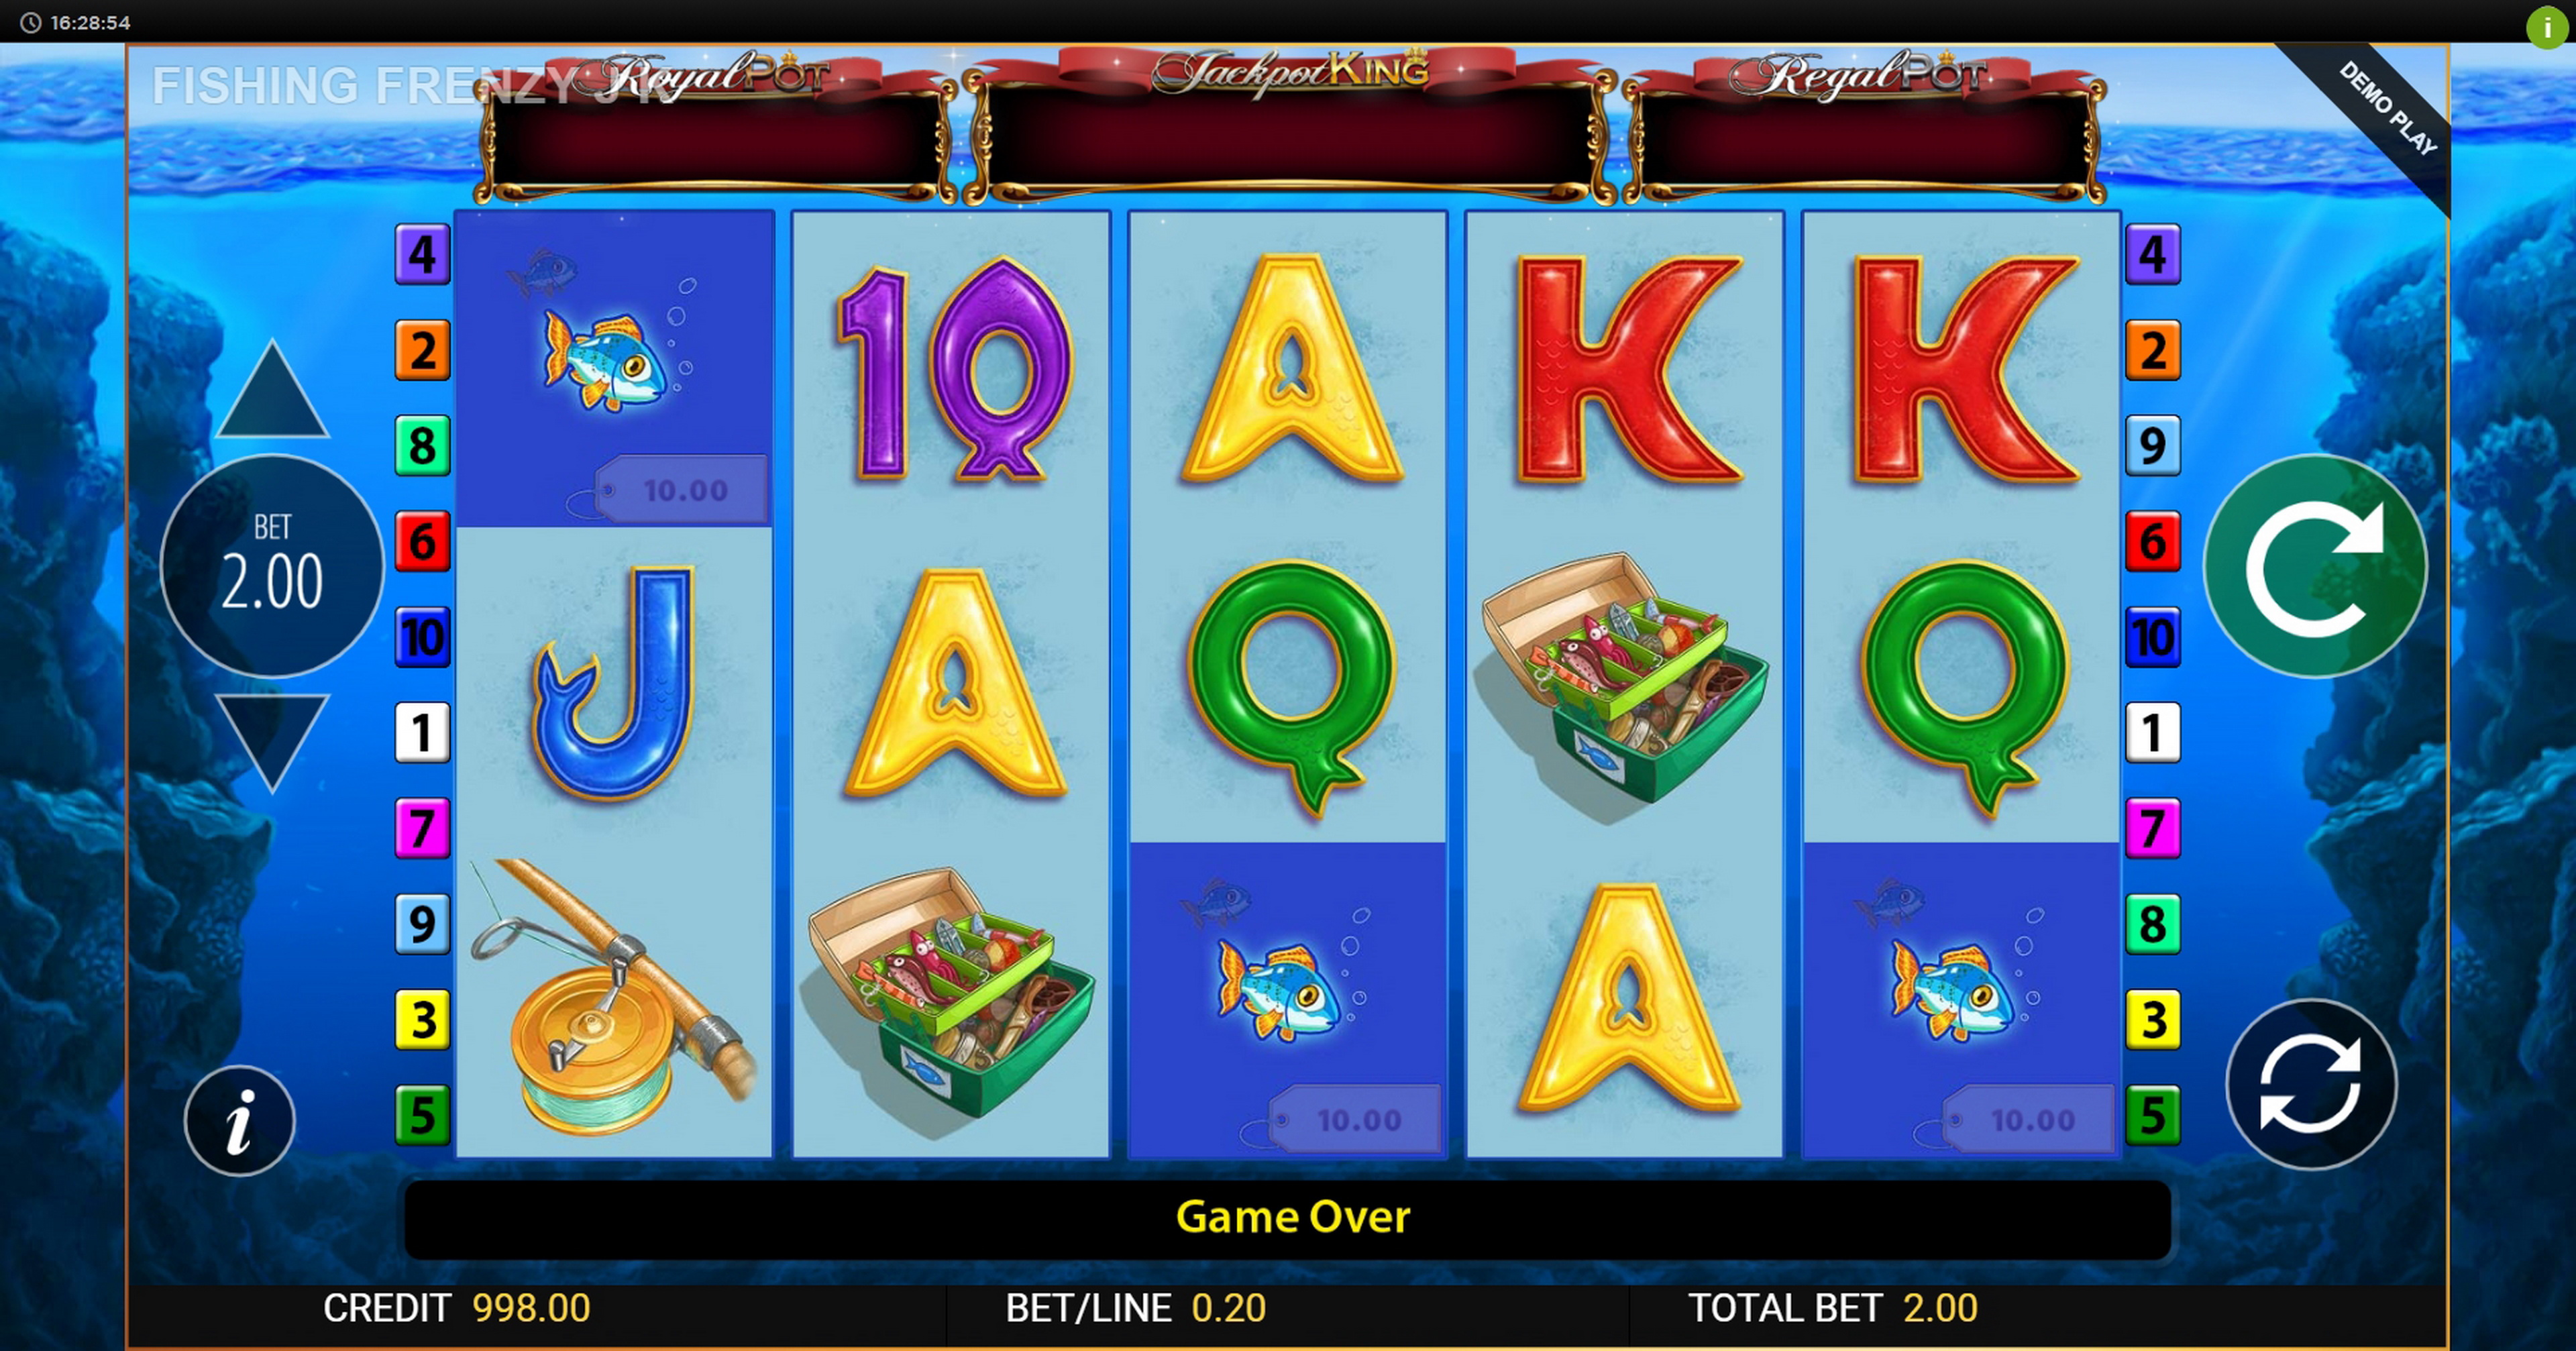 Reels in Fishin Frenzy Jackpot King Slot Game by Blueprint Gaming